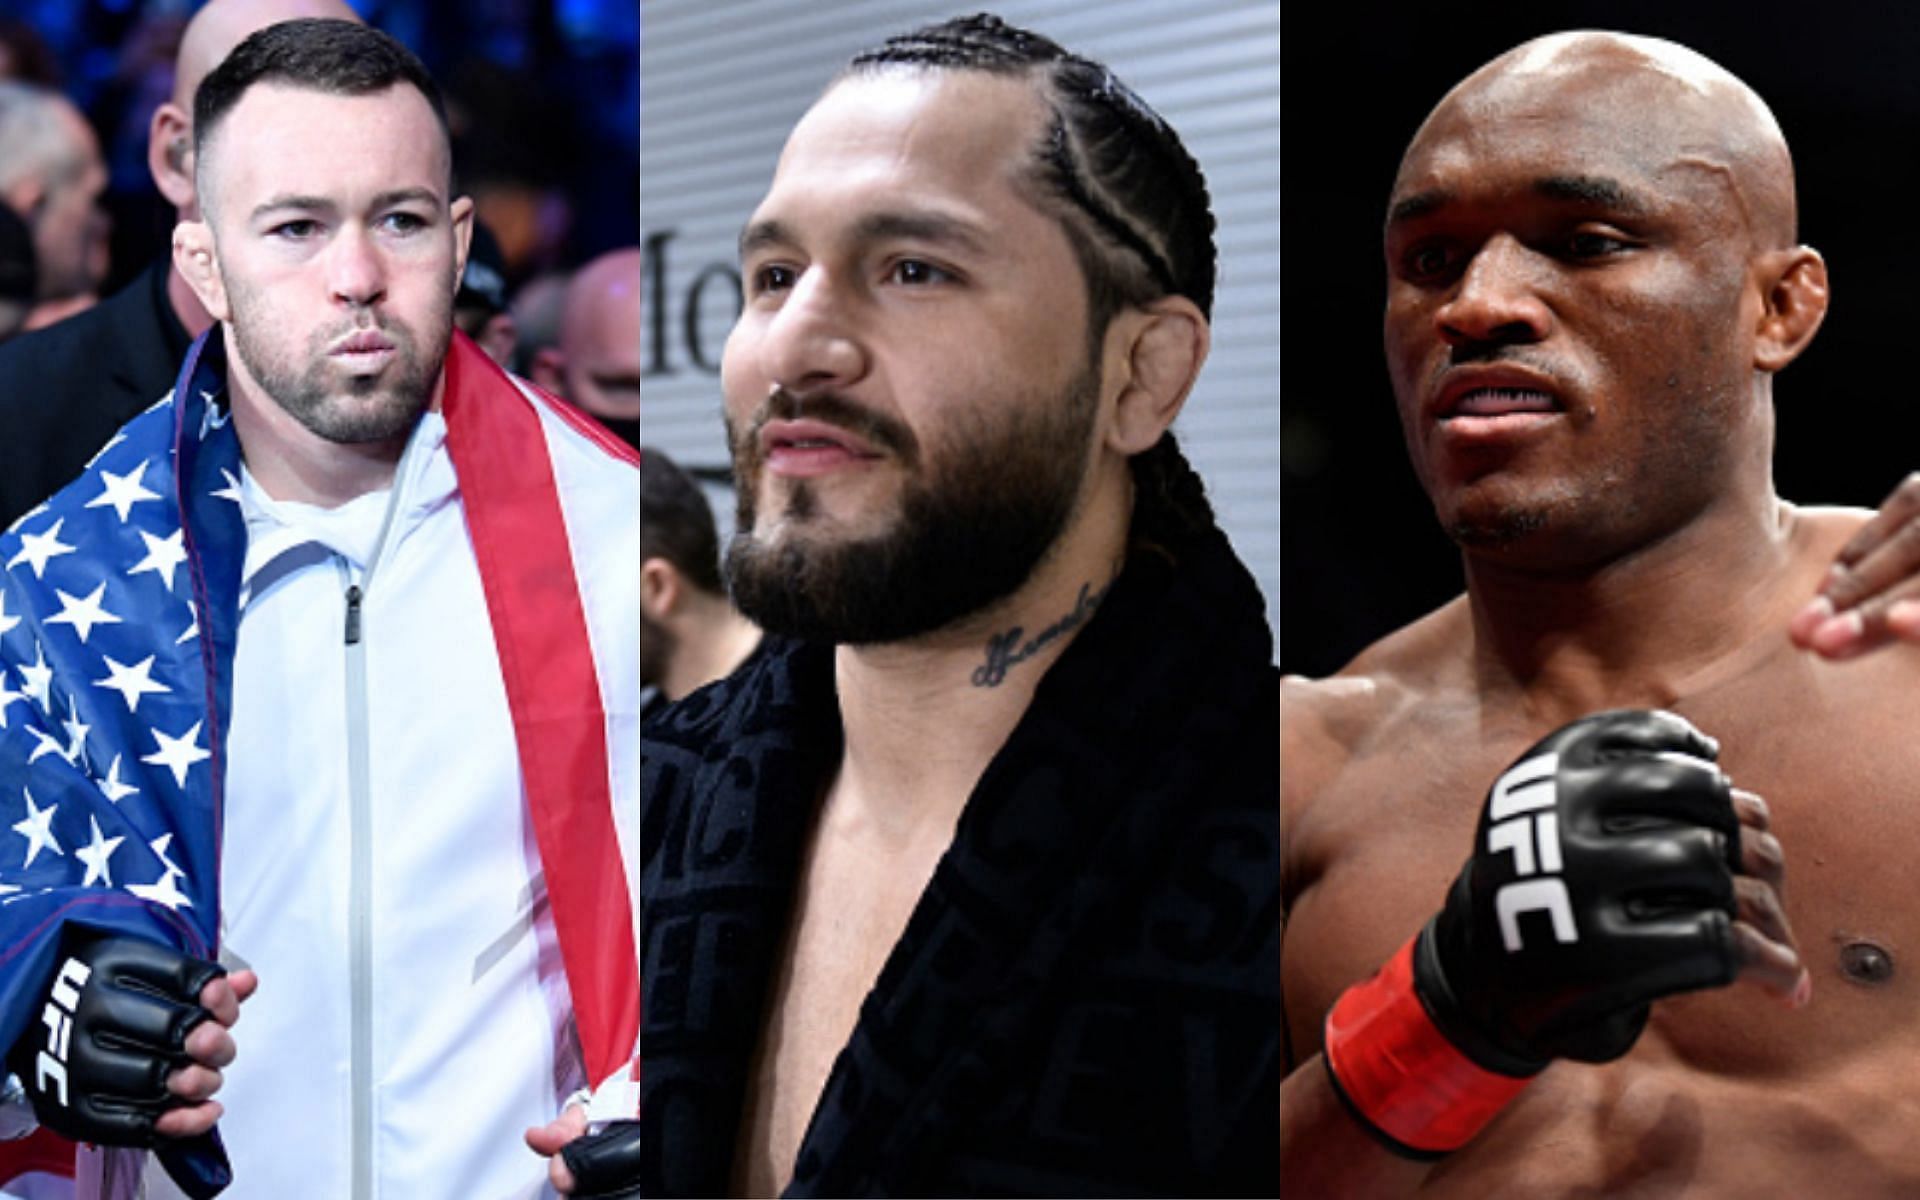 Colby Covington, Jorge Masvidal, and Kamaru Usman have a lot of history with one another